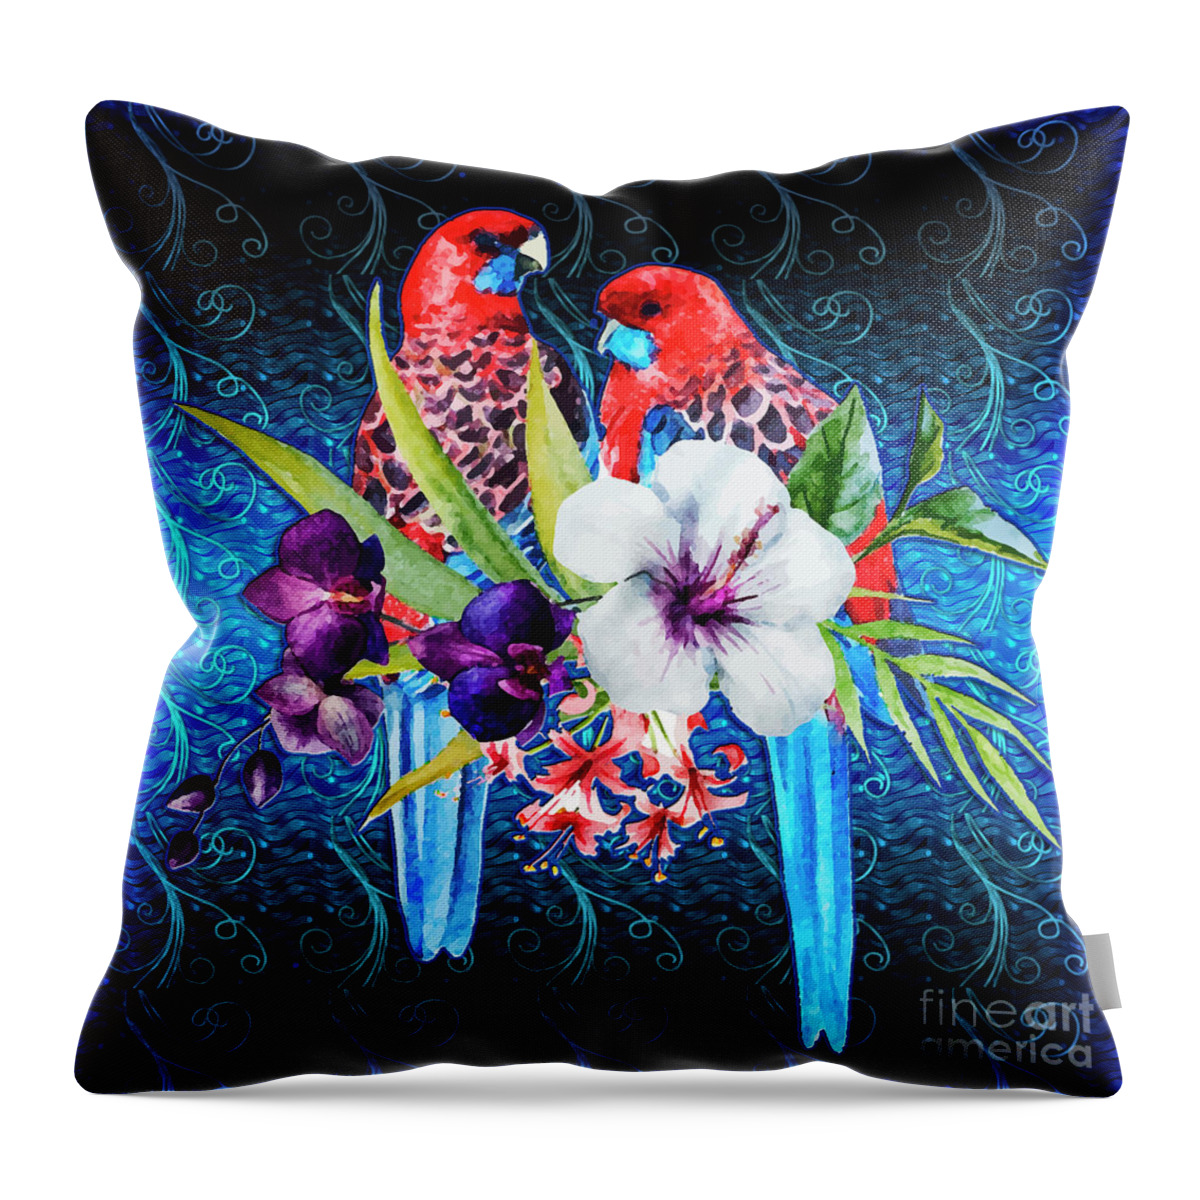 Birds Throw Pillow featuring the digital art Paired Parrots by Digital Art Cafe